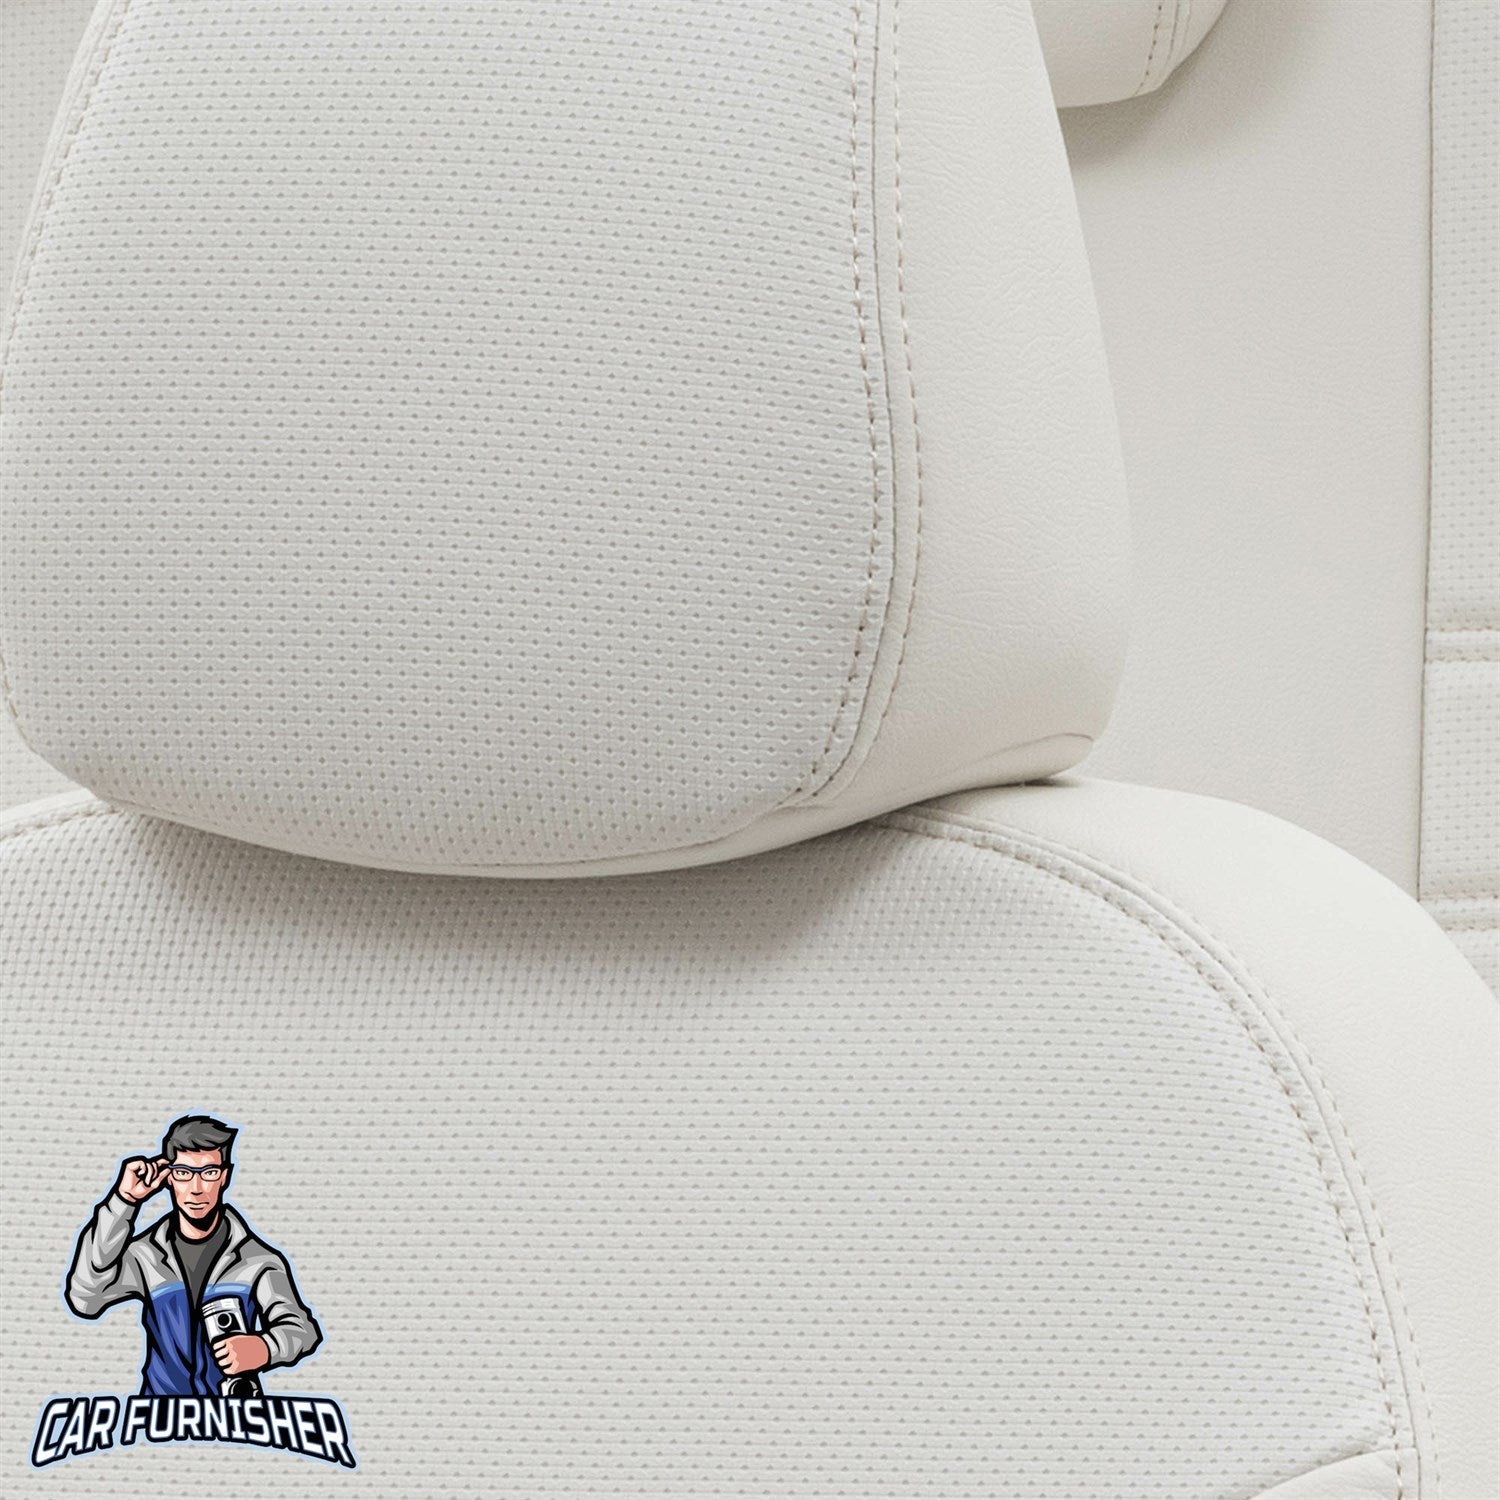 Toyota Prius Seat Cover New York Leather Design Ivory Leather